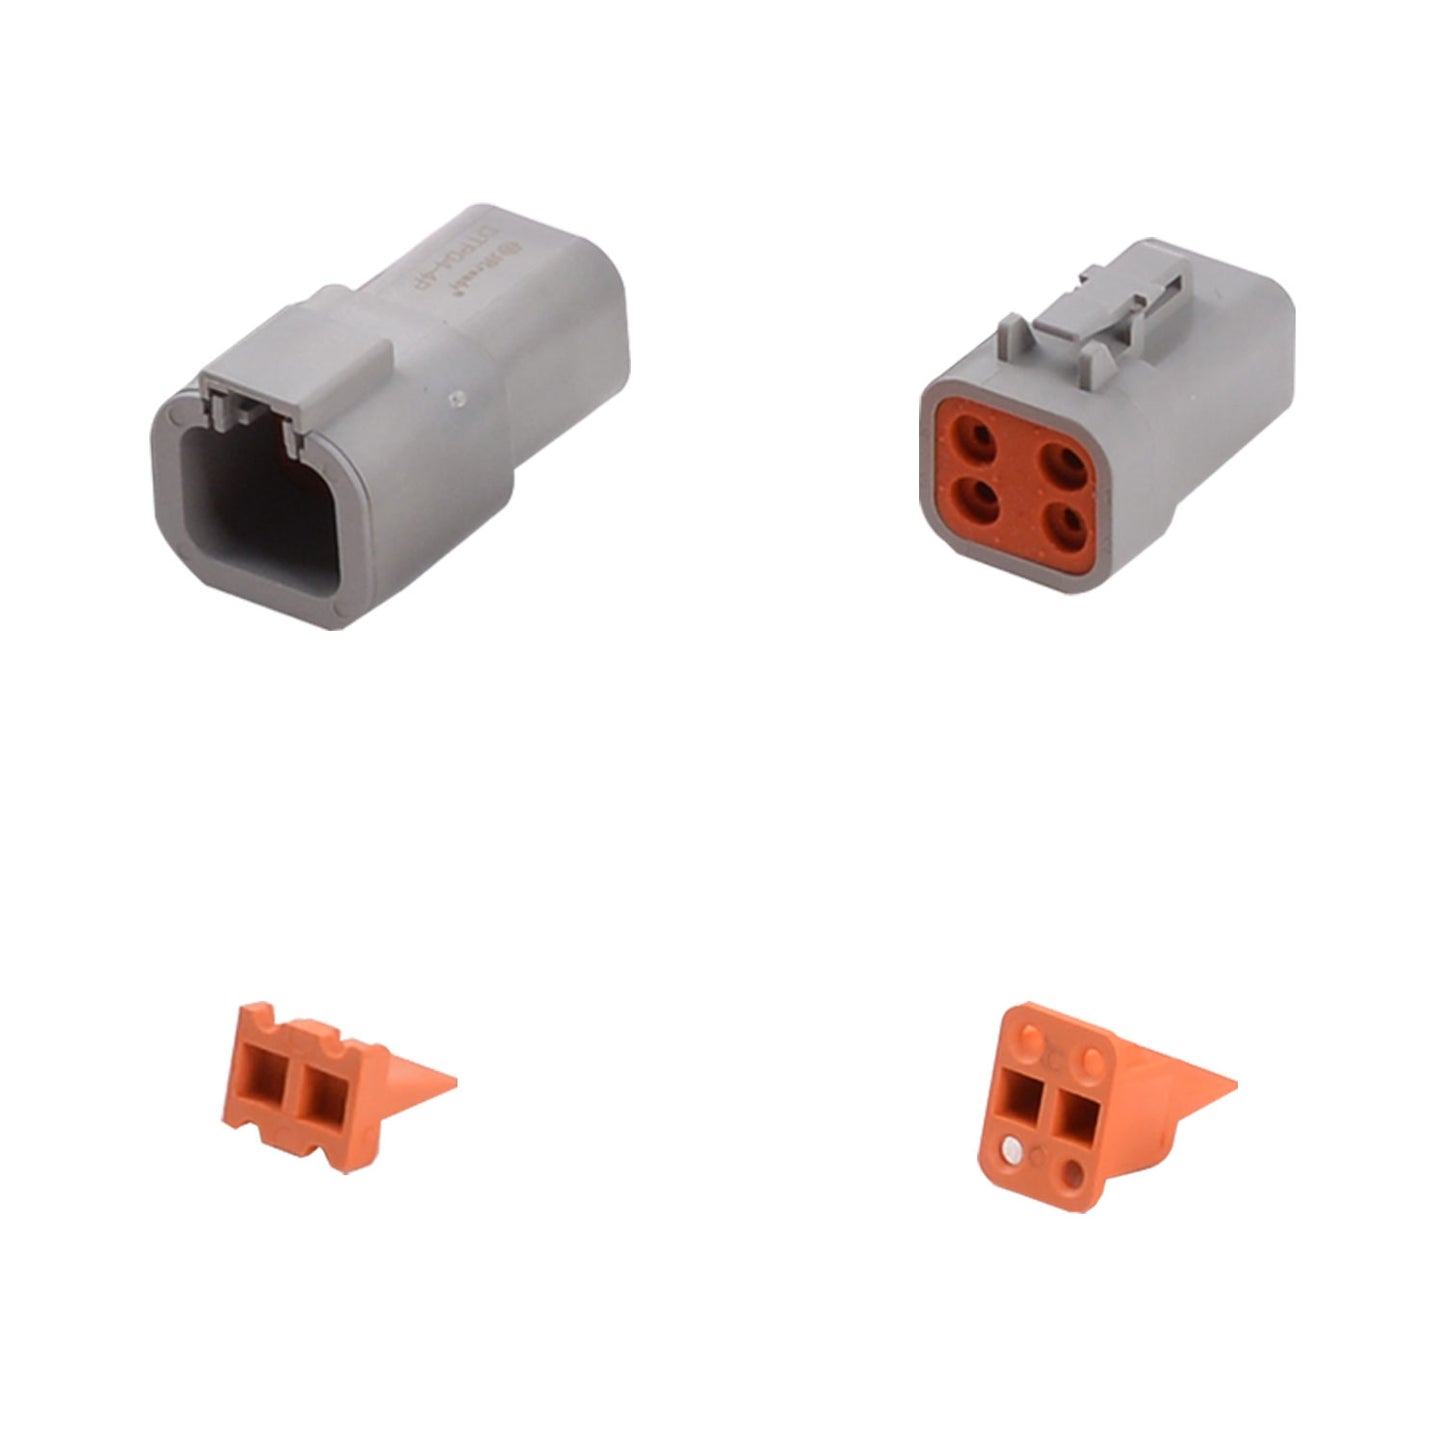 JRready ST6373 DTP 2 4 Pin Connectors 12 Pairs & Solid Contacts / ST6374-0212 2 Pin Connectors  /ST6374-0412 4 Pin Connectors